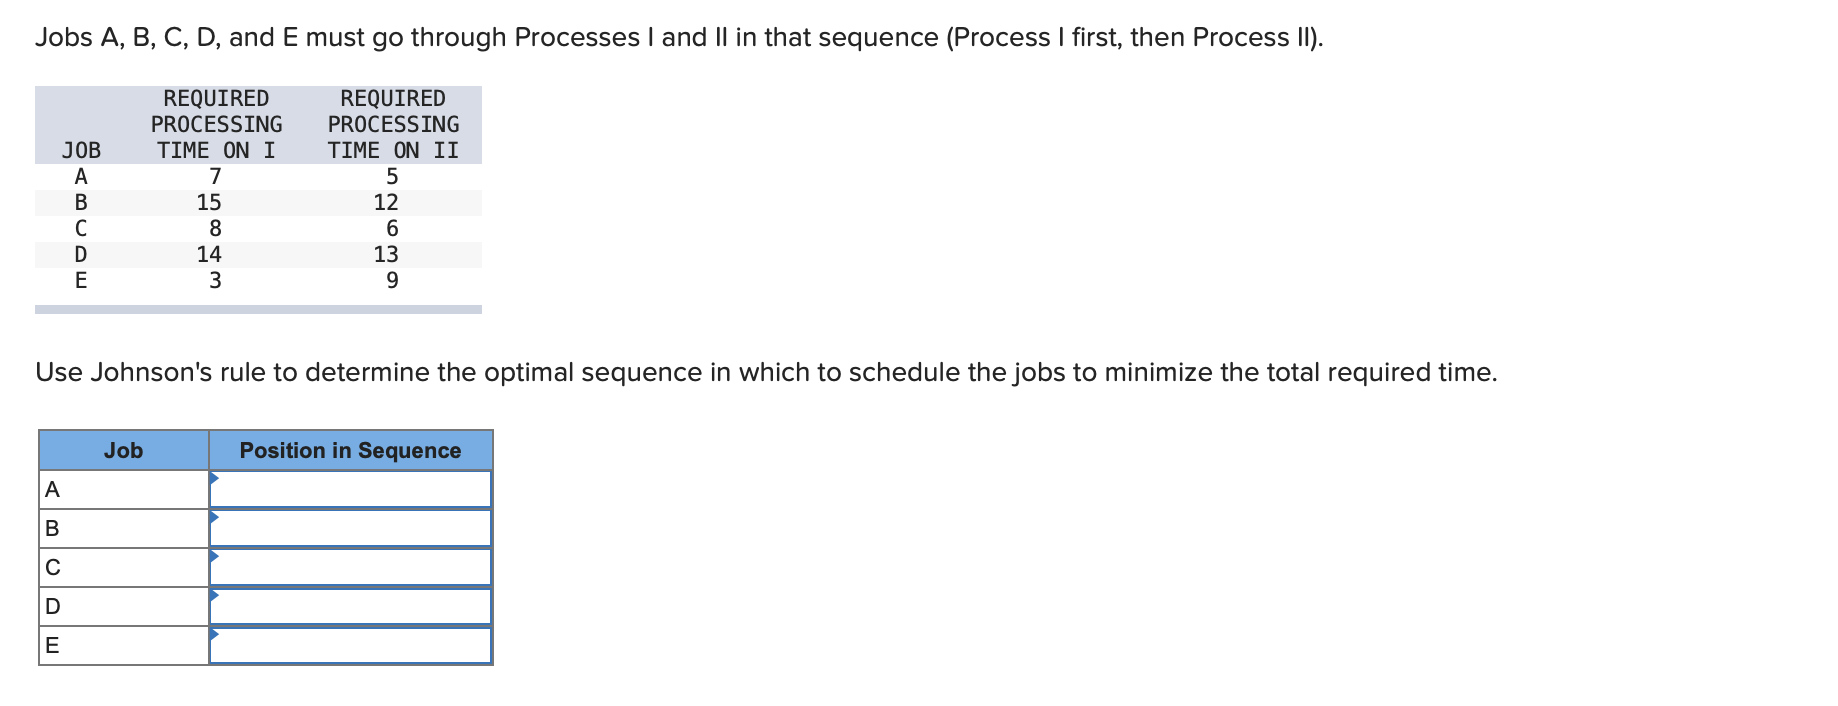 Solved Jobs A, B, C, D, and E must go through Processes I